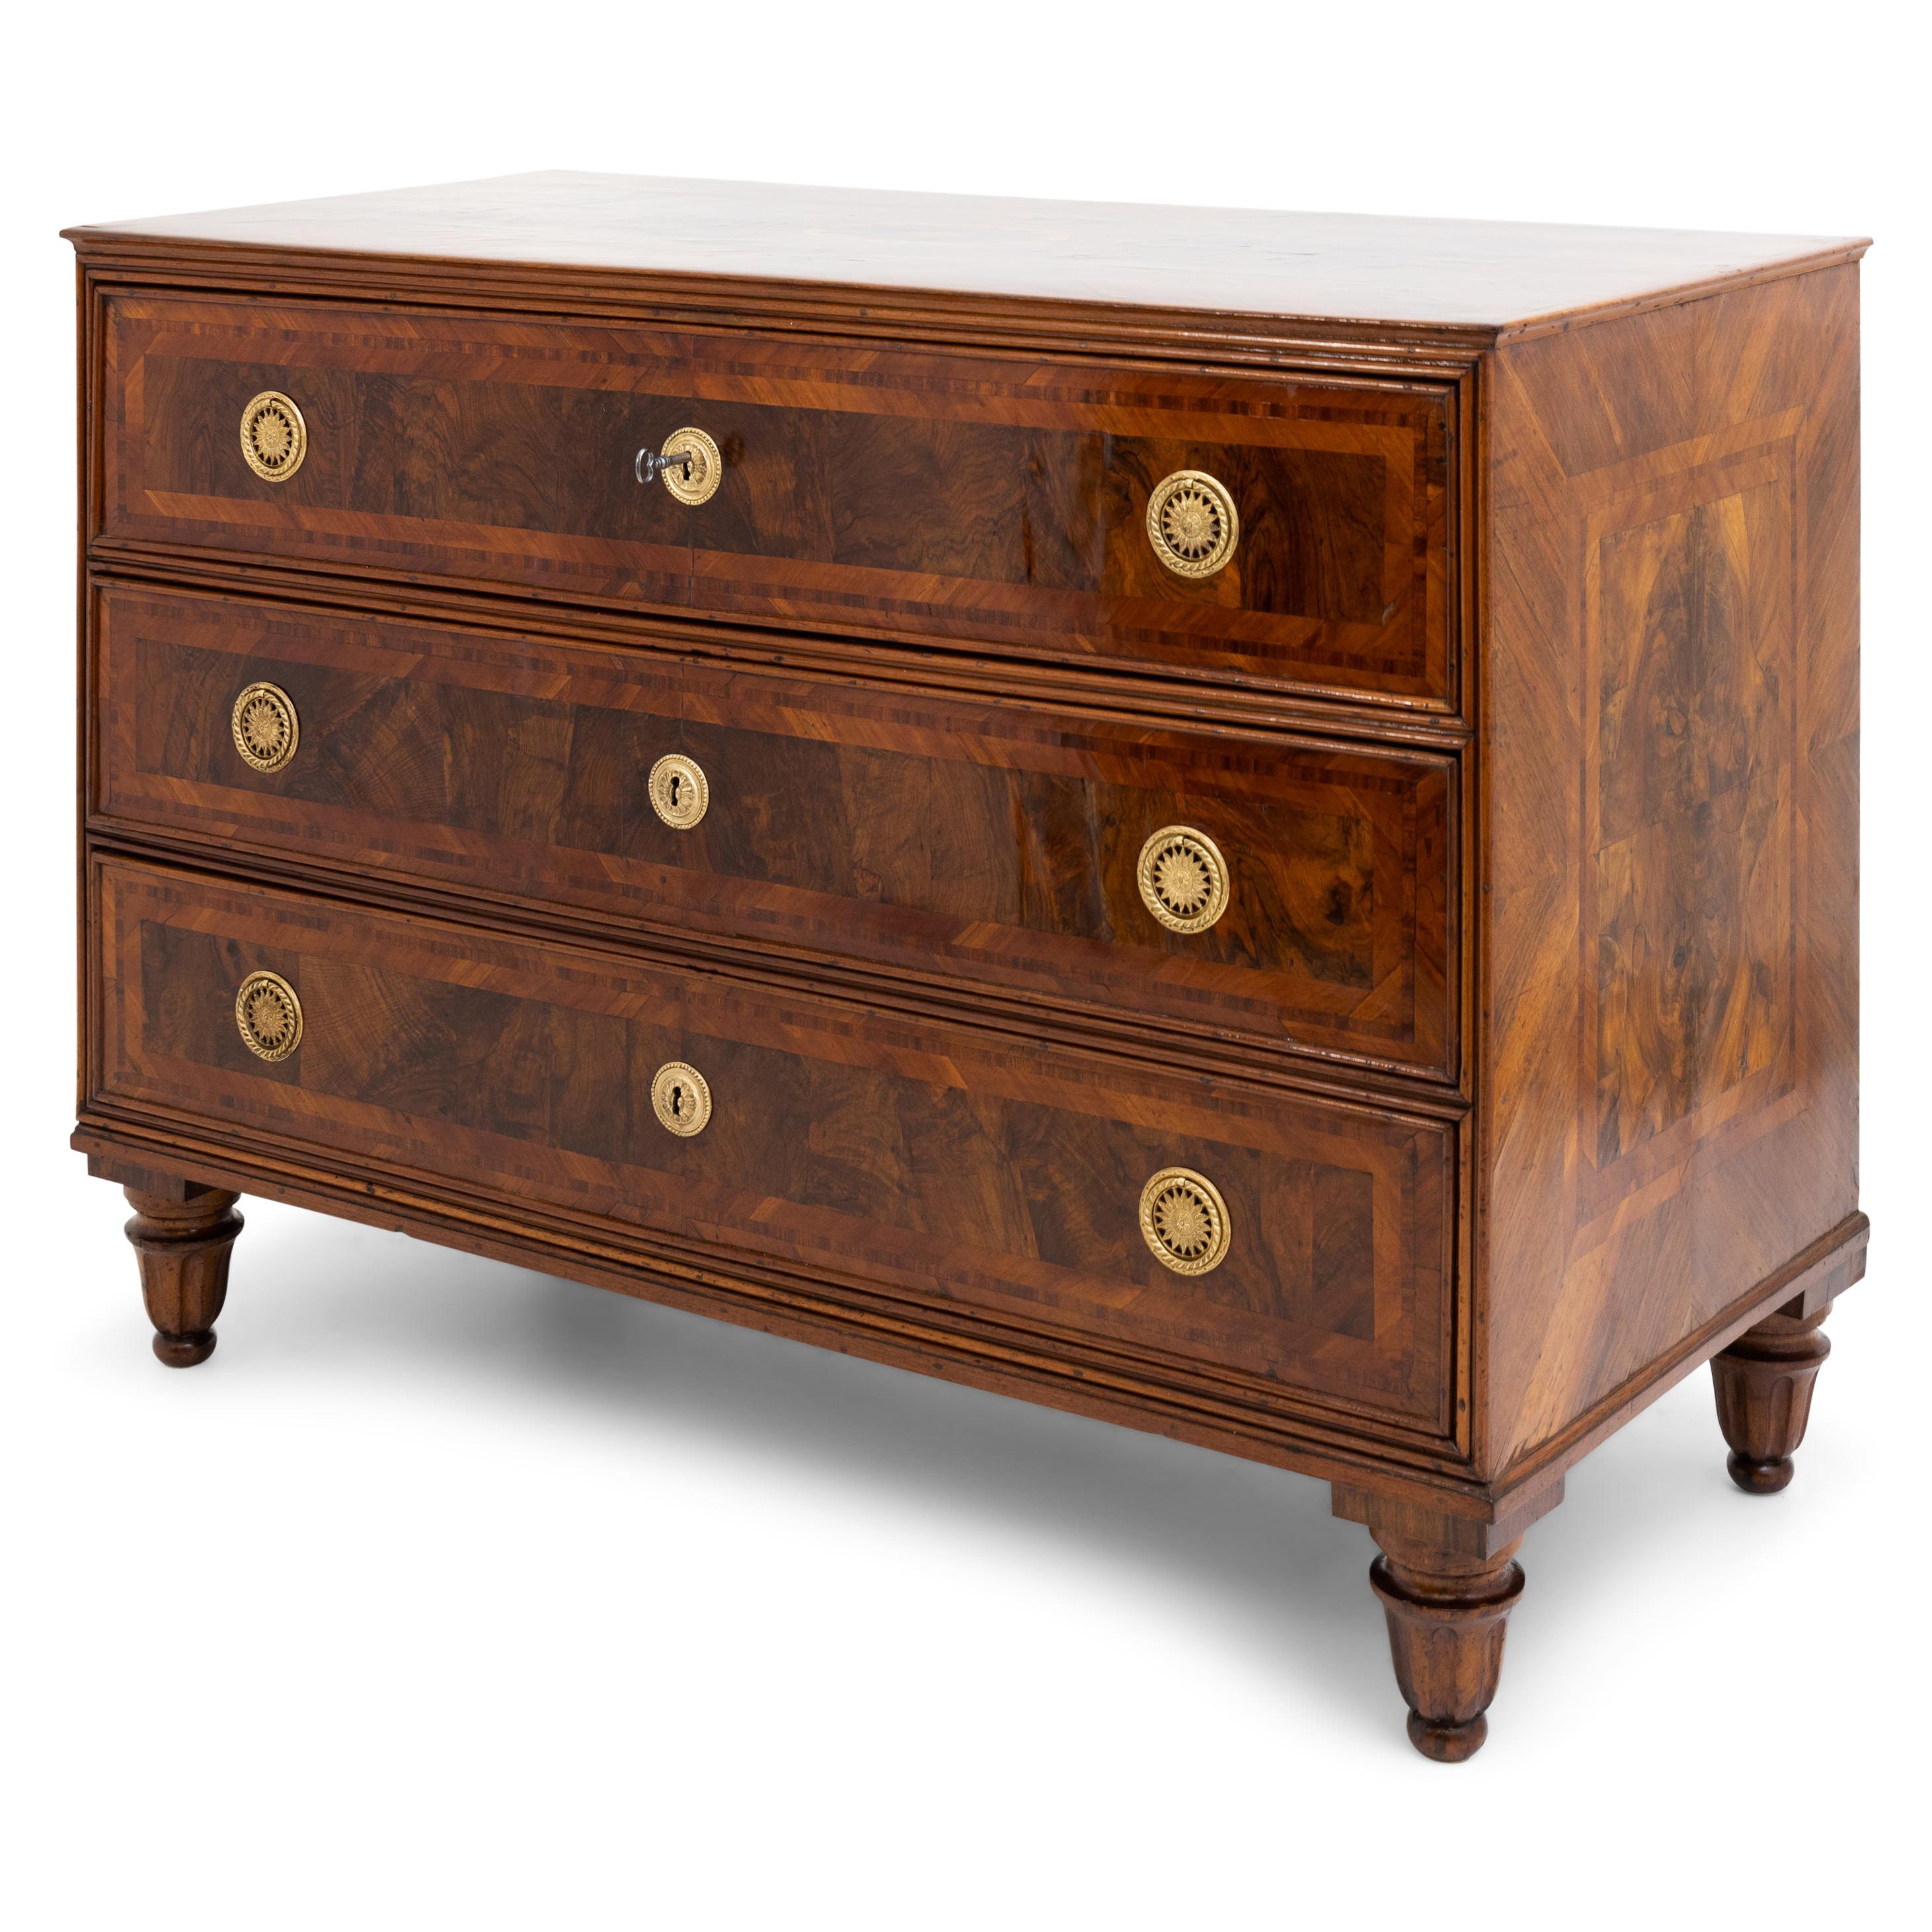 Pair of Louis Seize chests of drawers on baluster feet with three drawers and profiled trusses in walnut veneered. The disc-shaped fittings with rosette decoration and ring-shaped handles are fire-gilded. The chests of drawers have been expertly